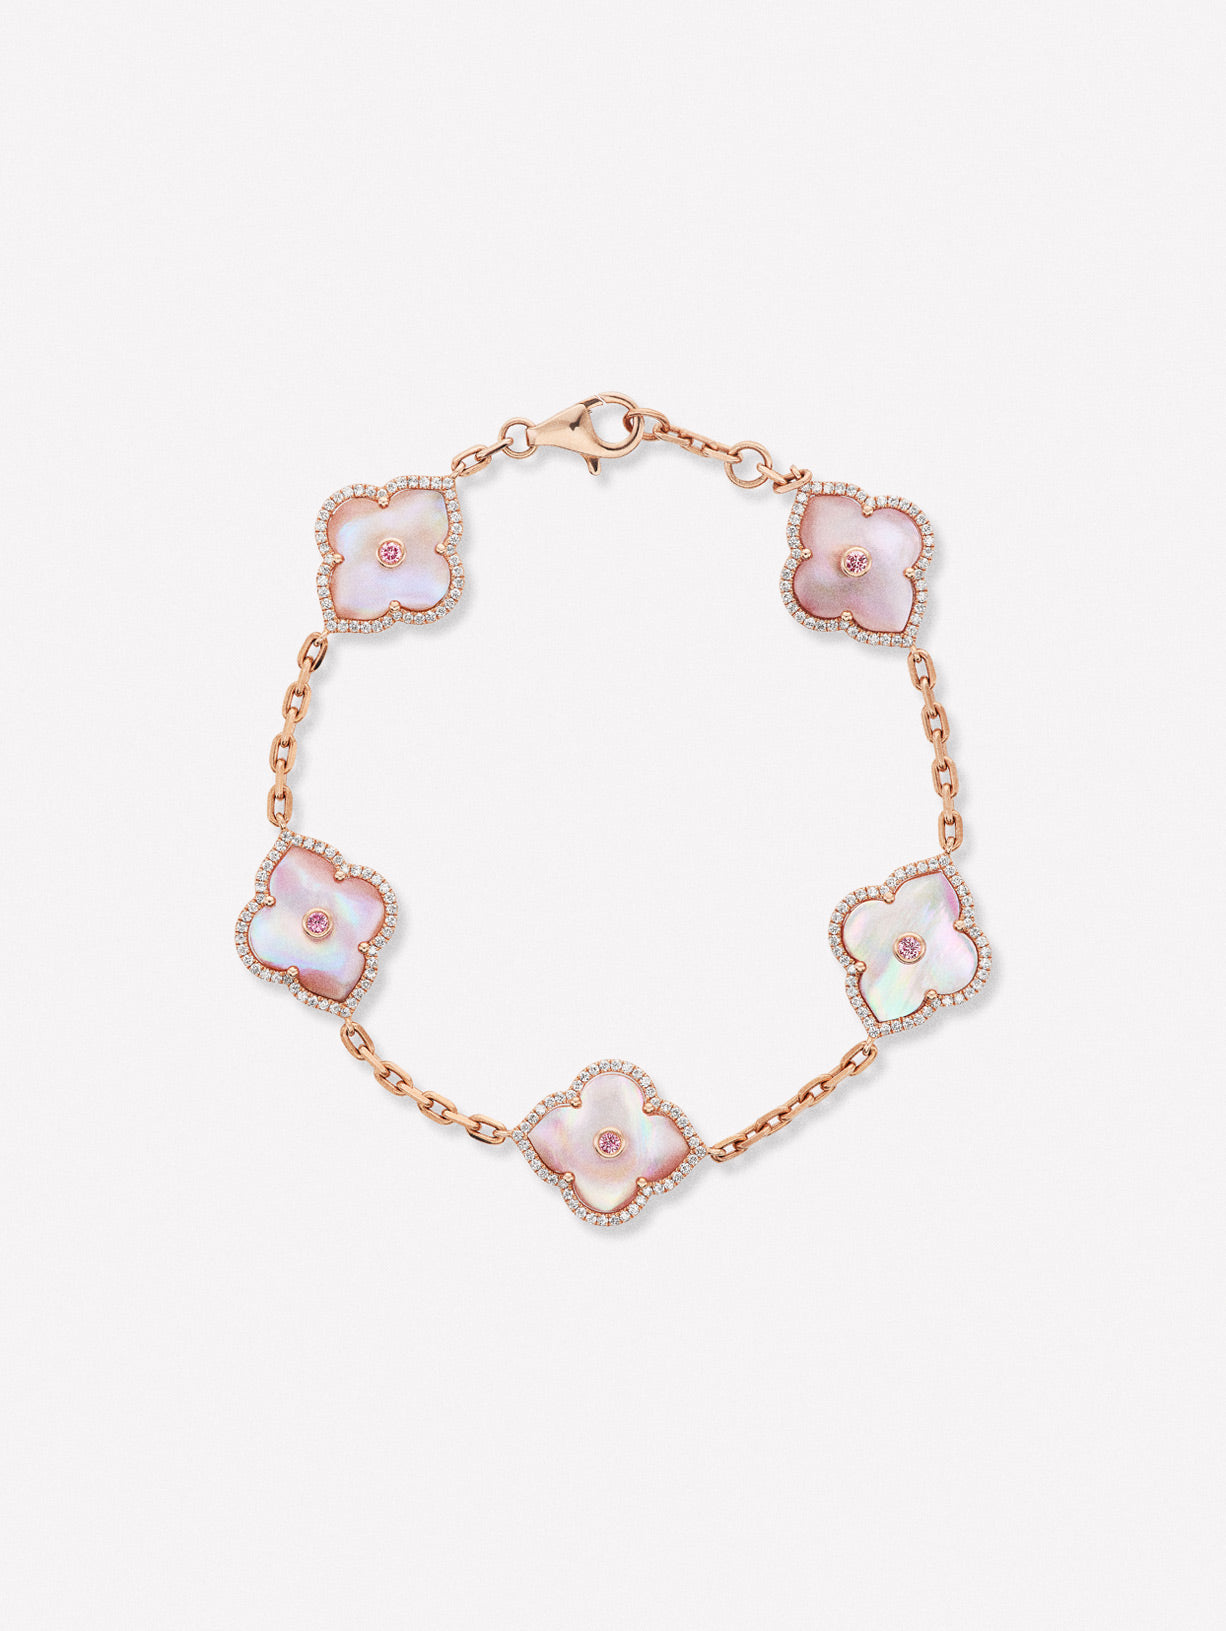 Argyle Pink™ Diamond and Mother of Pearl Bracelet